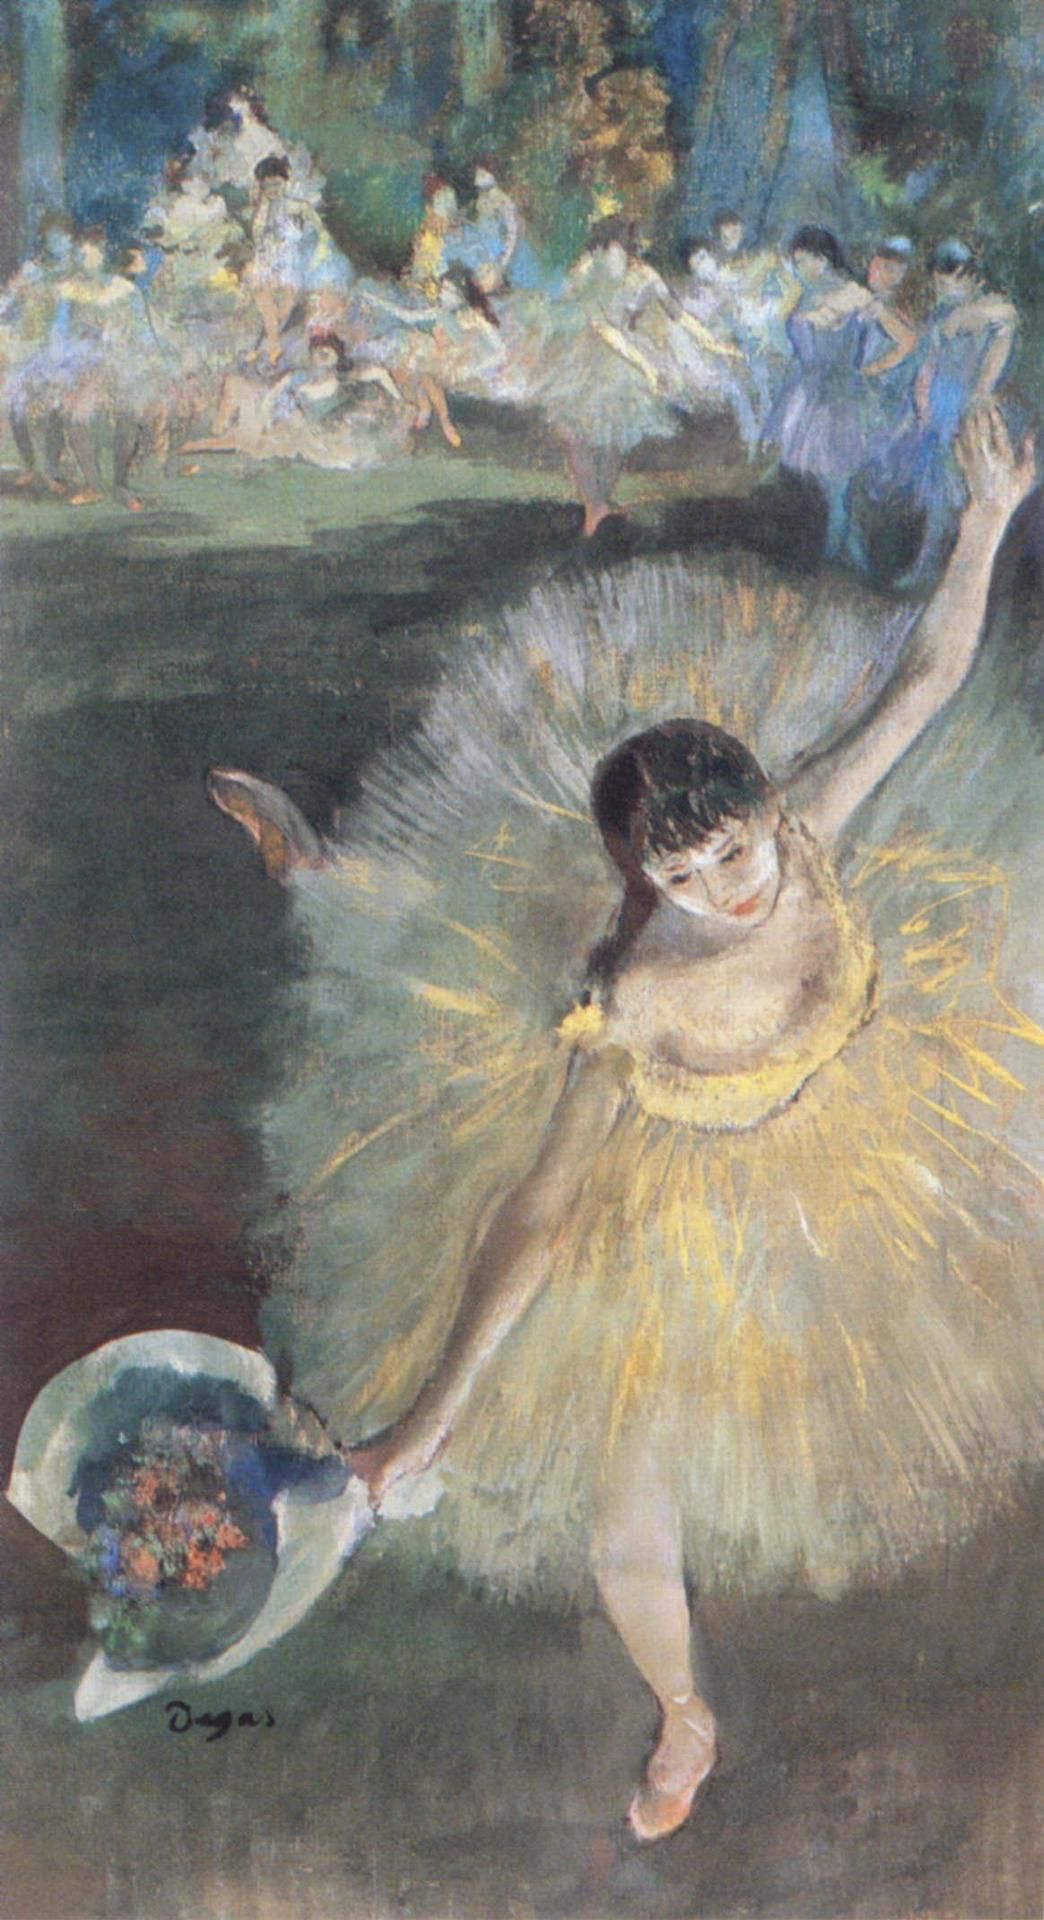 Fin d'Arabesque, with ballerina Rosita Mauri, 1877 Painting by Edgar Degas Reproduction Oil Painting by Blue Surf Art